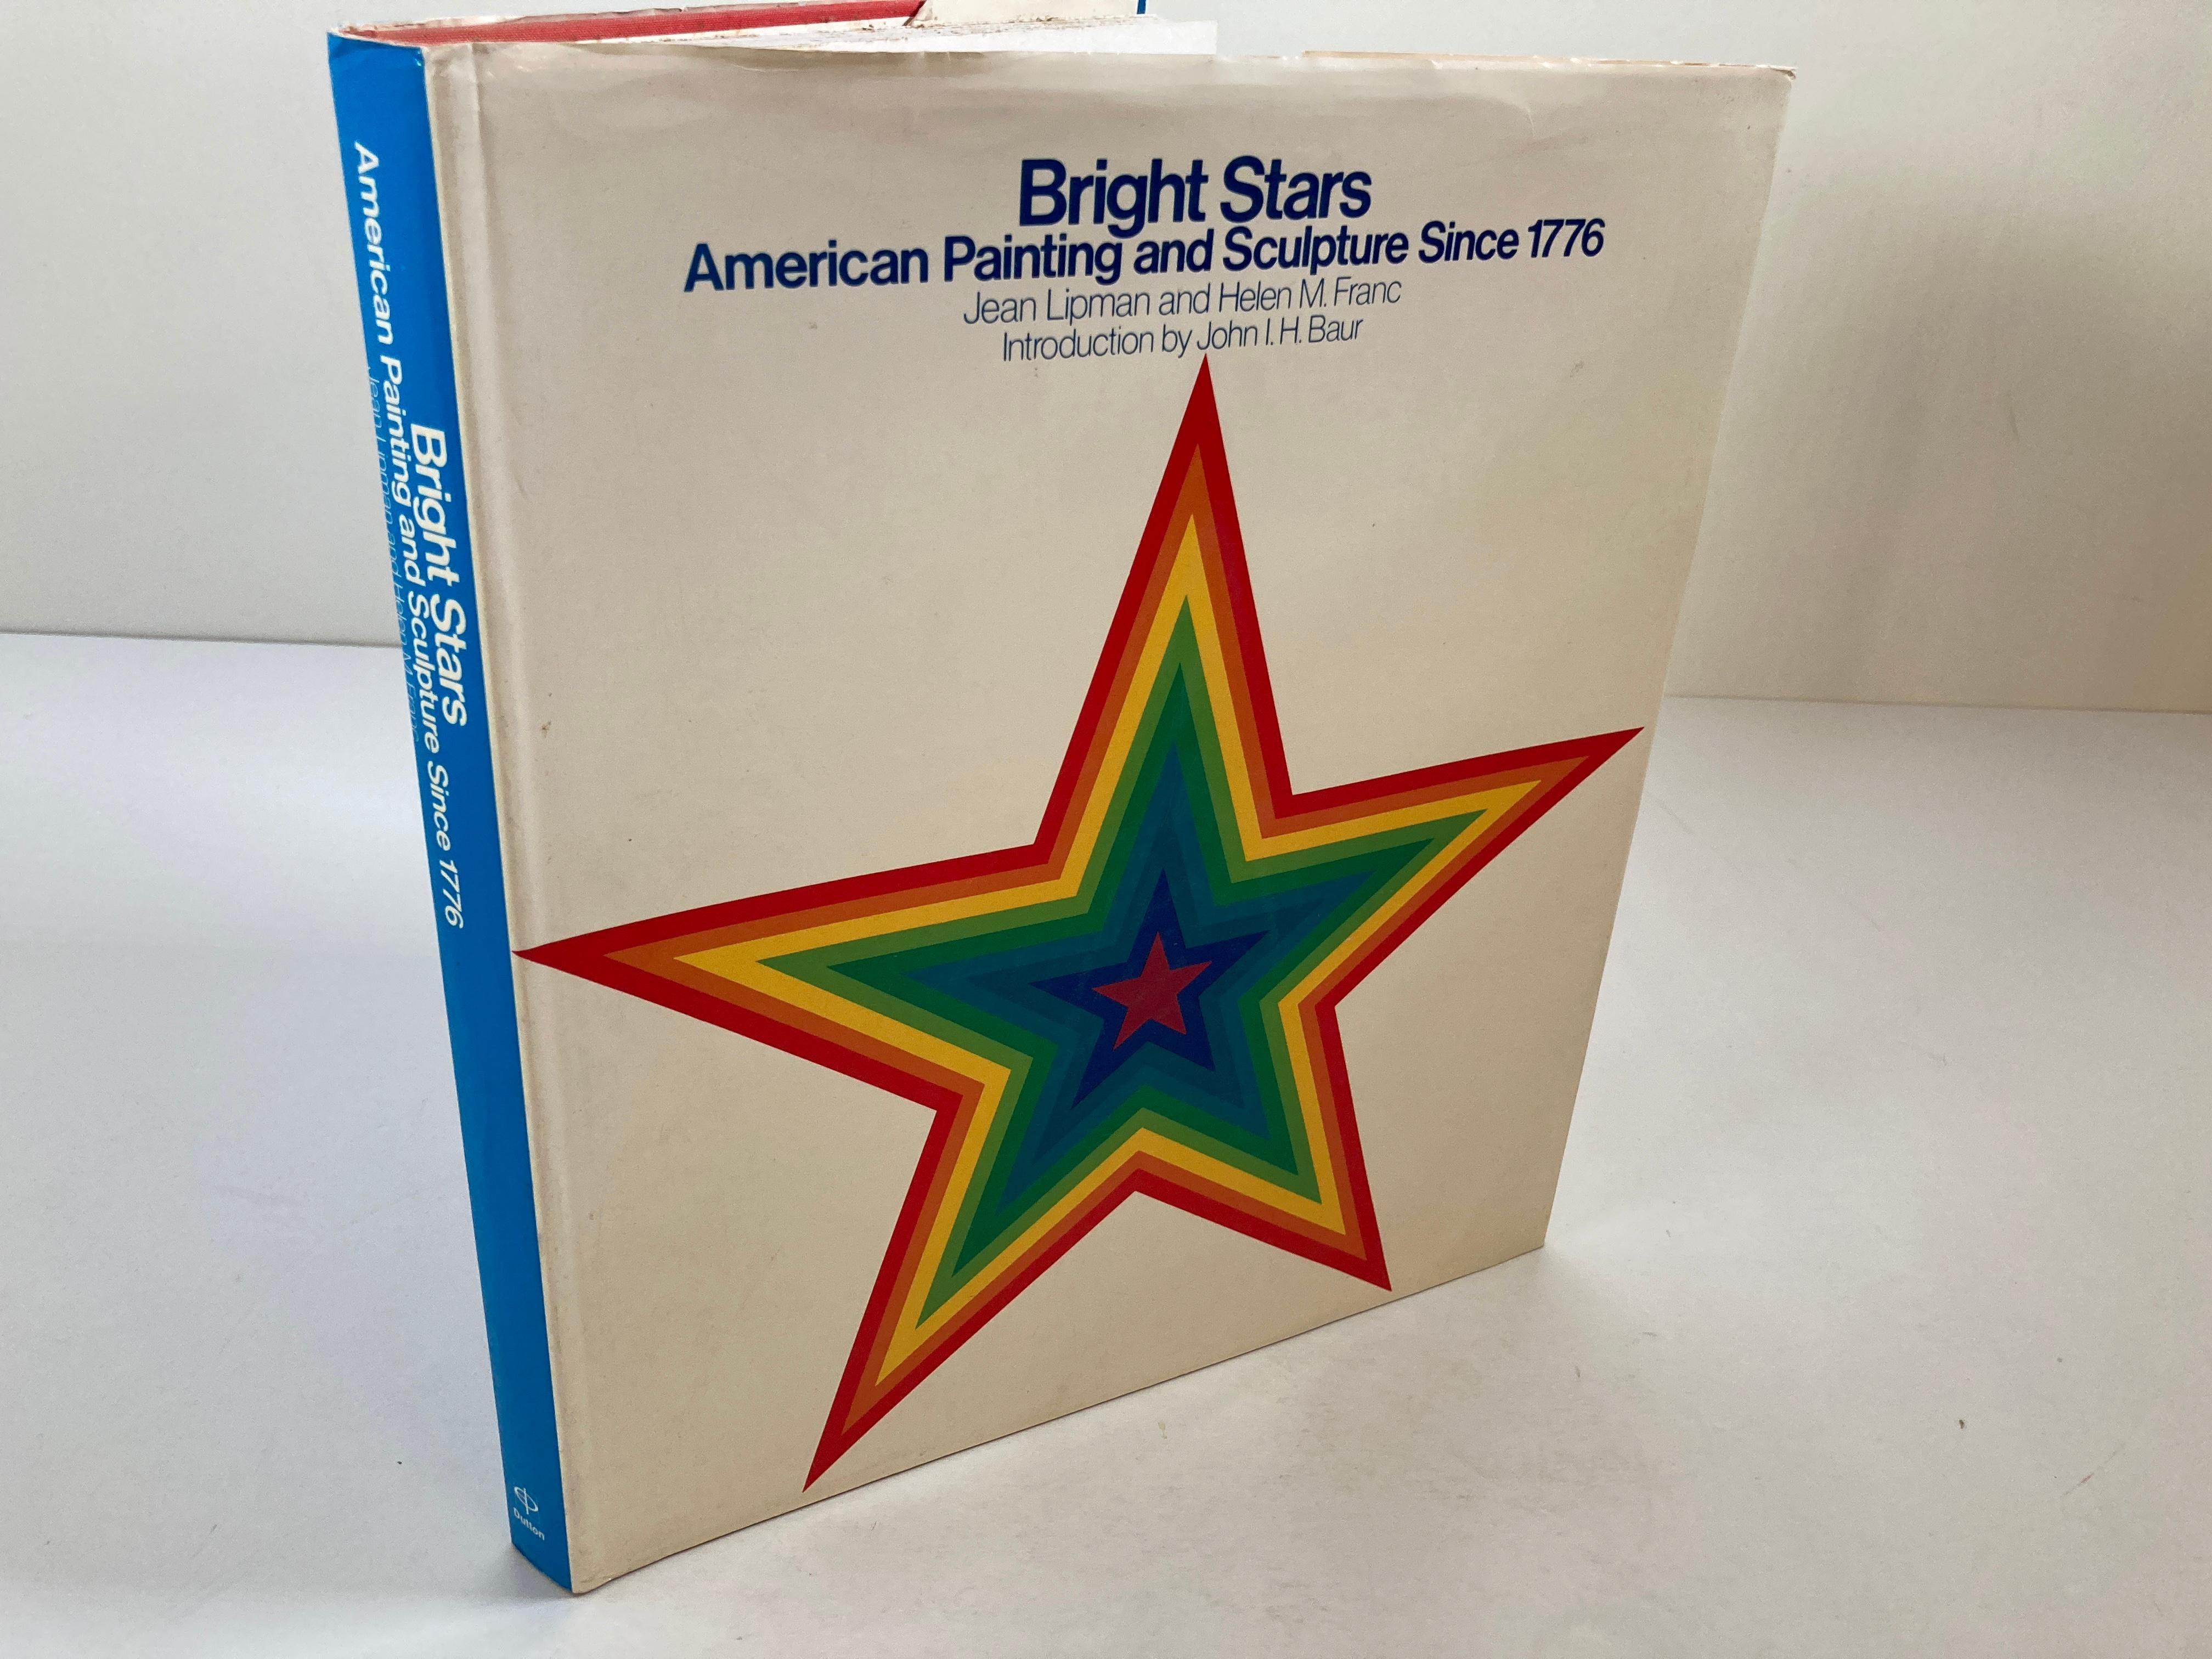 Paper Bright Stars American Painting and Sculpture Since 1776 Hardcover Book